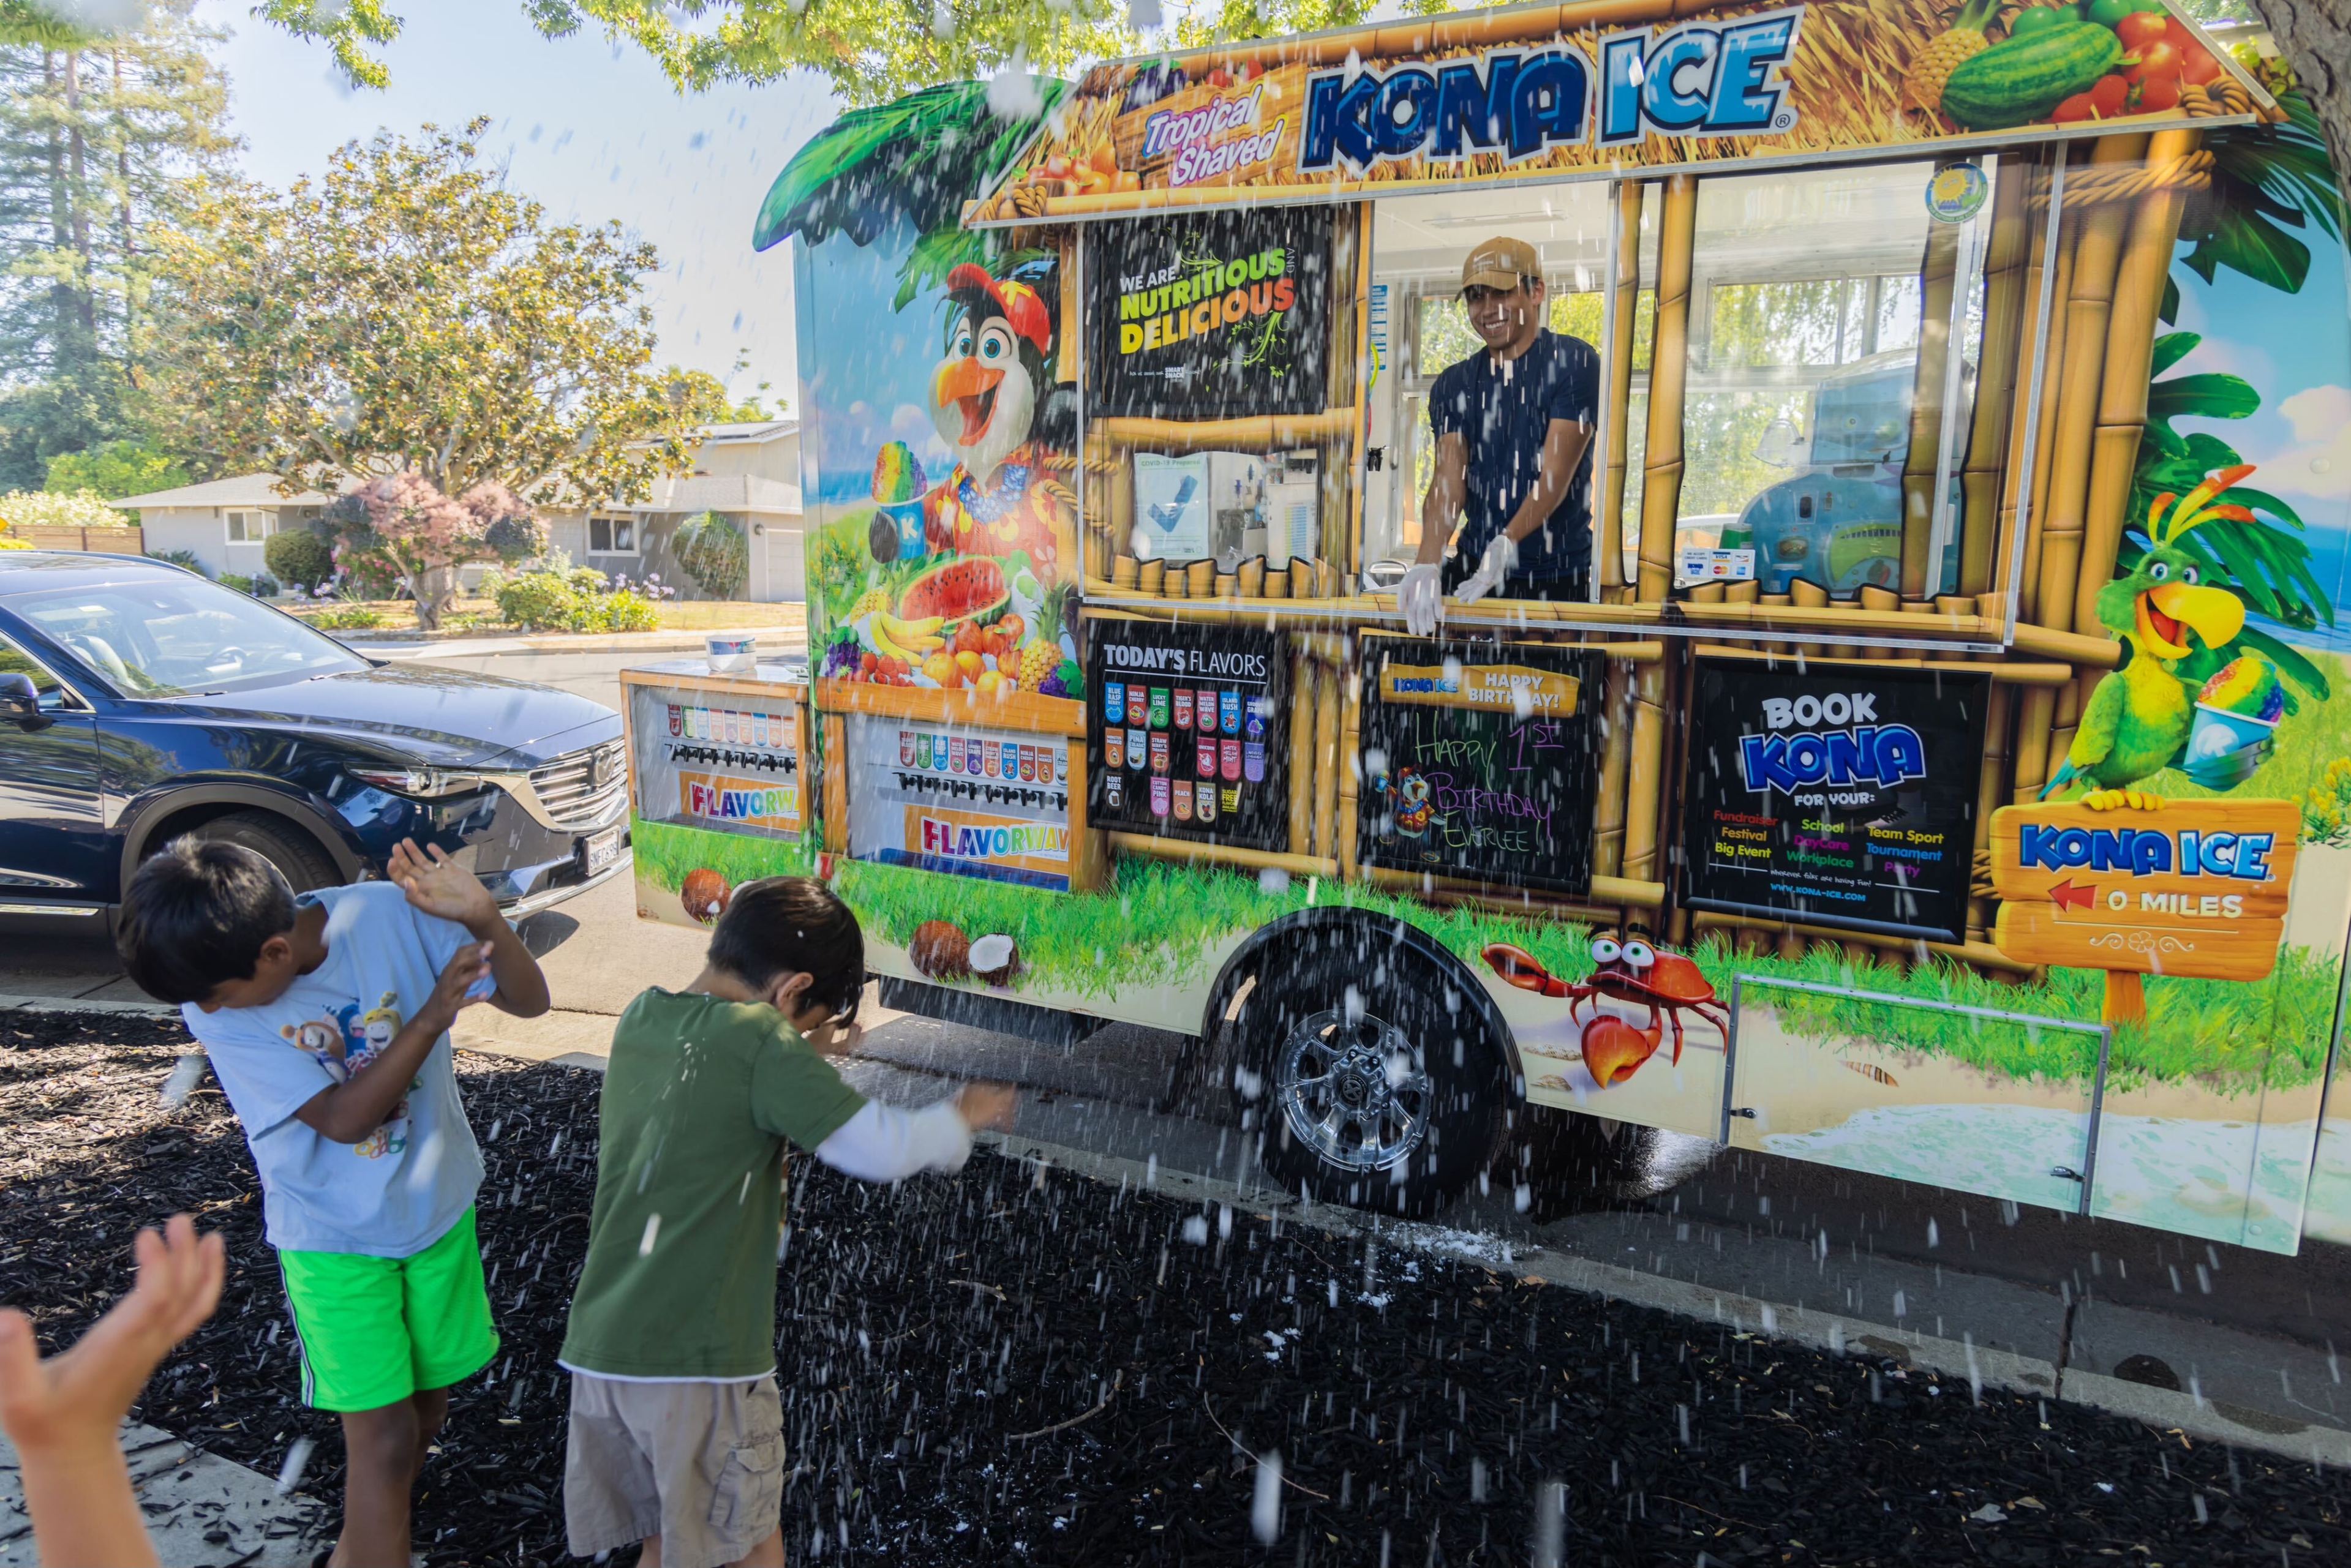 A smiling worker in a food truck showers children with stray shaved ice on a warm summer day